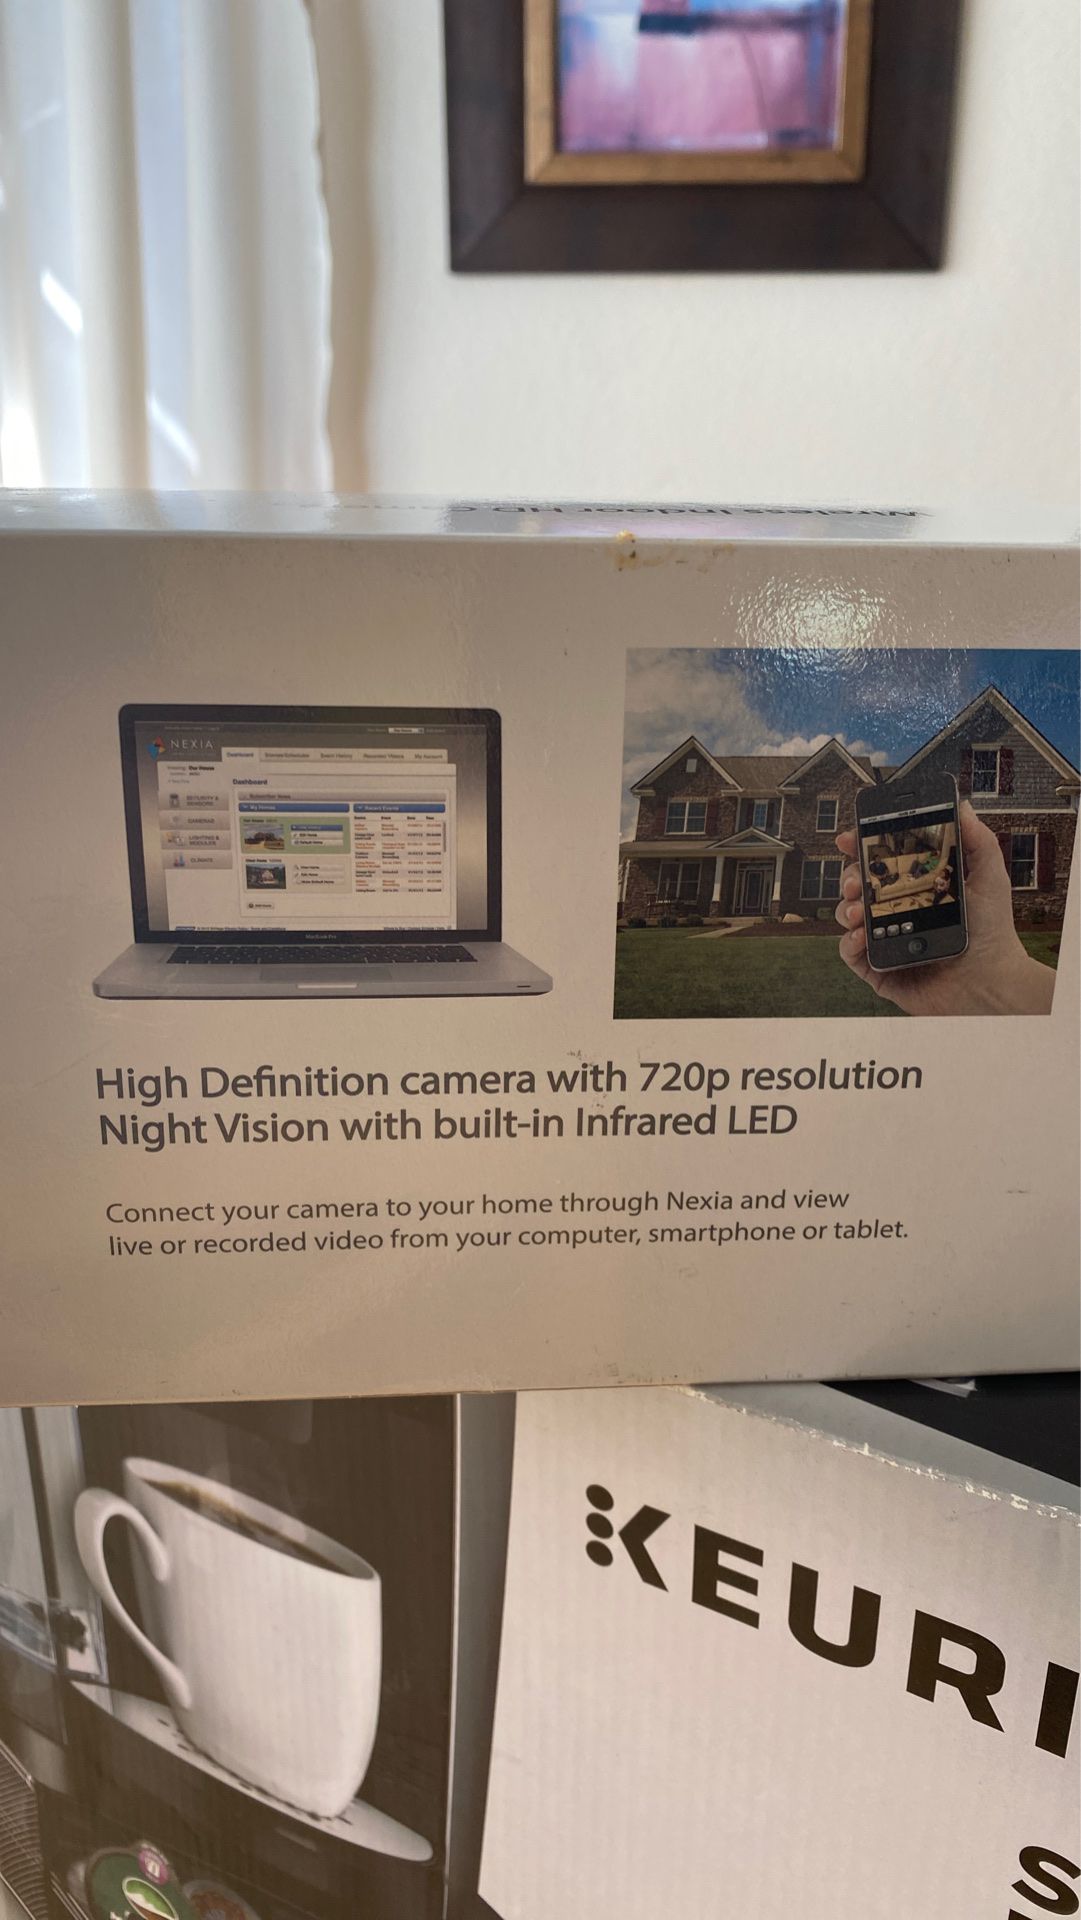 High Definition camera with 720p resolution